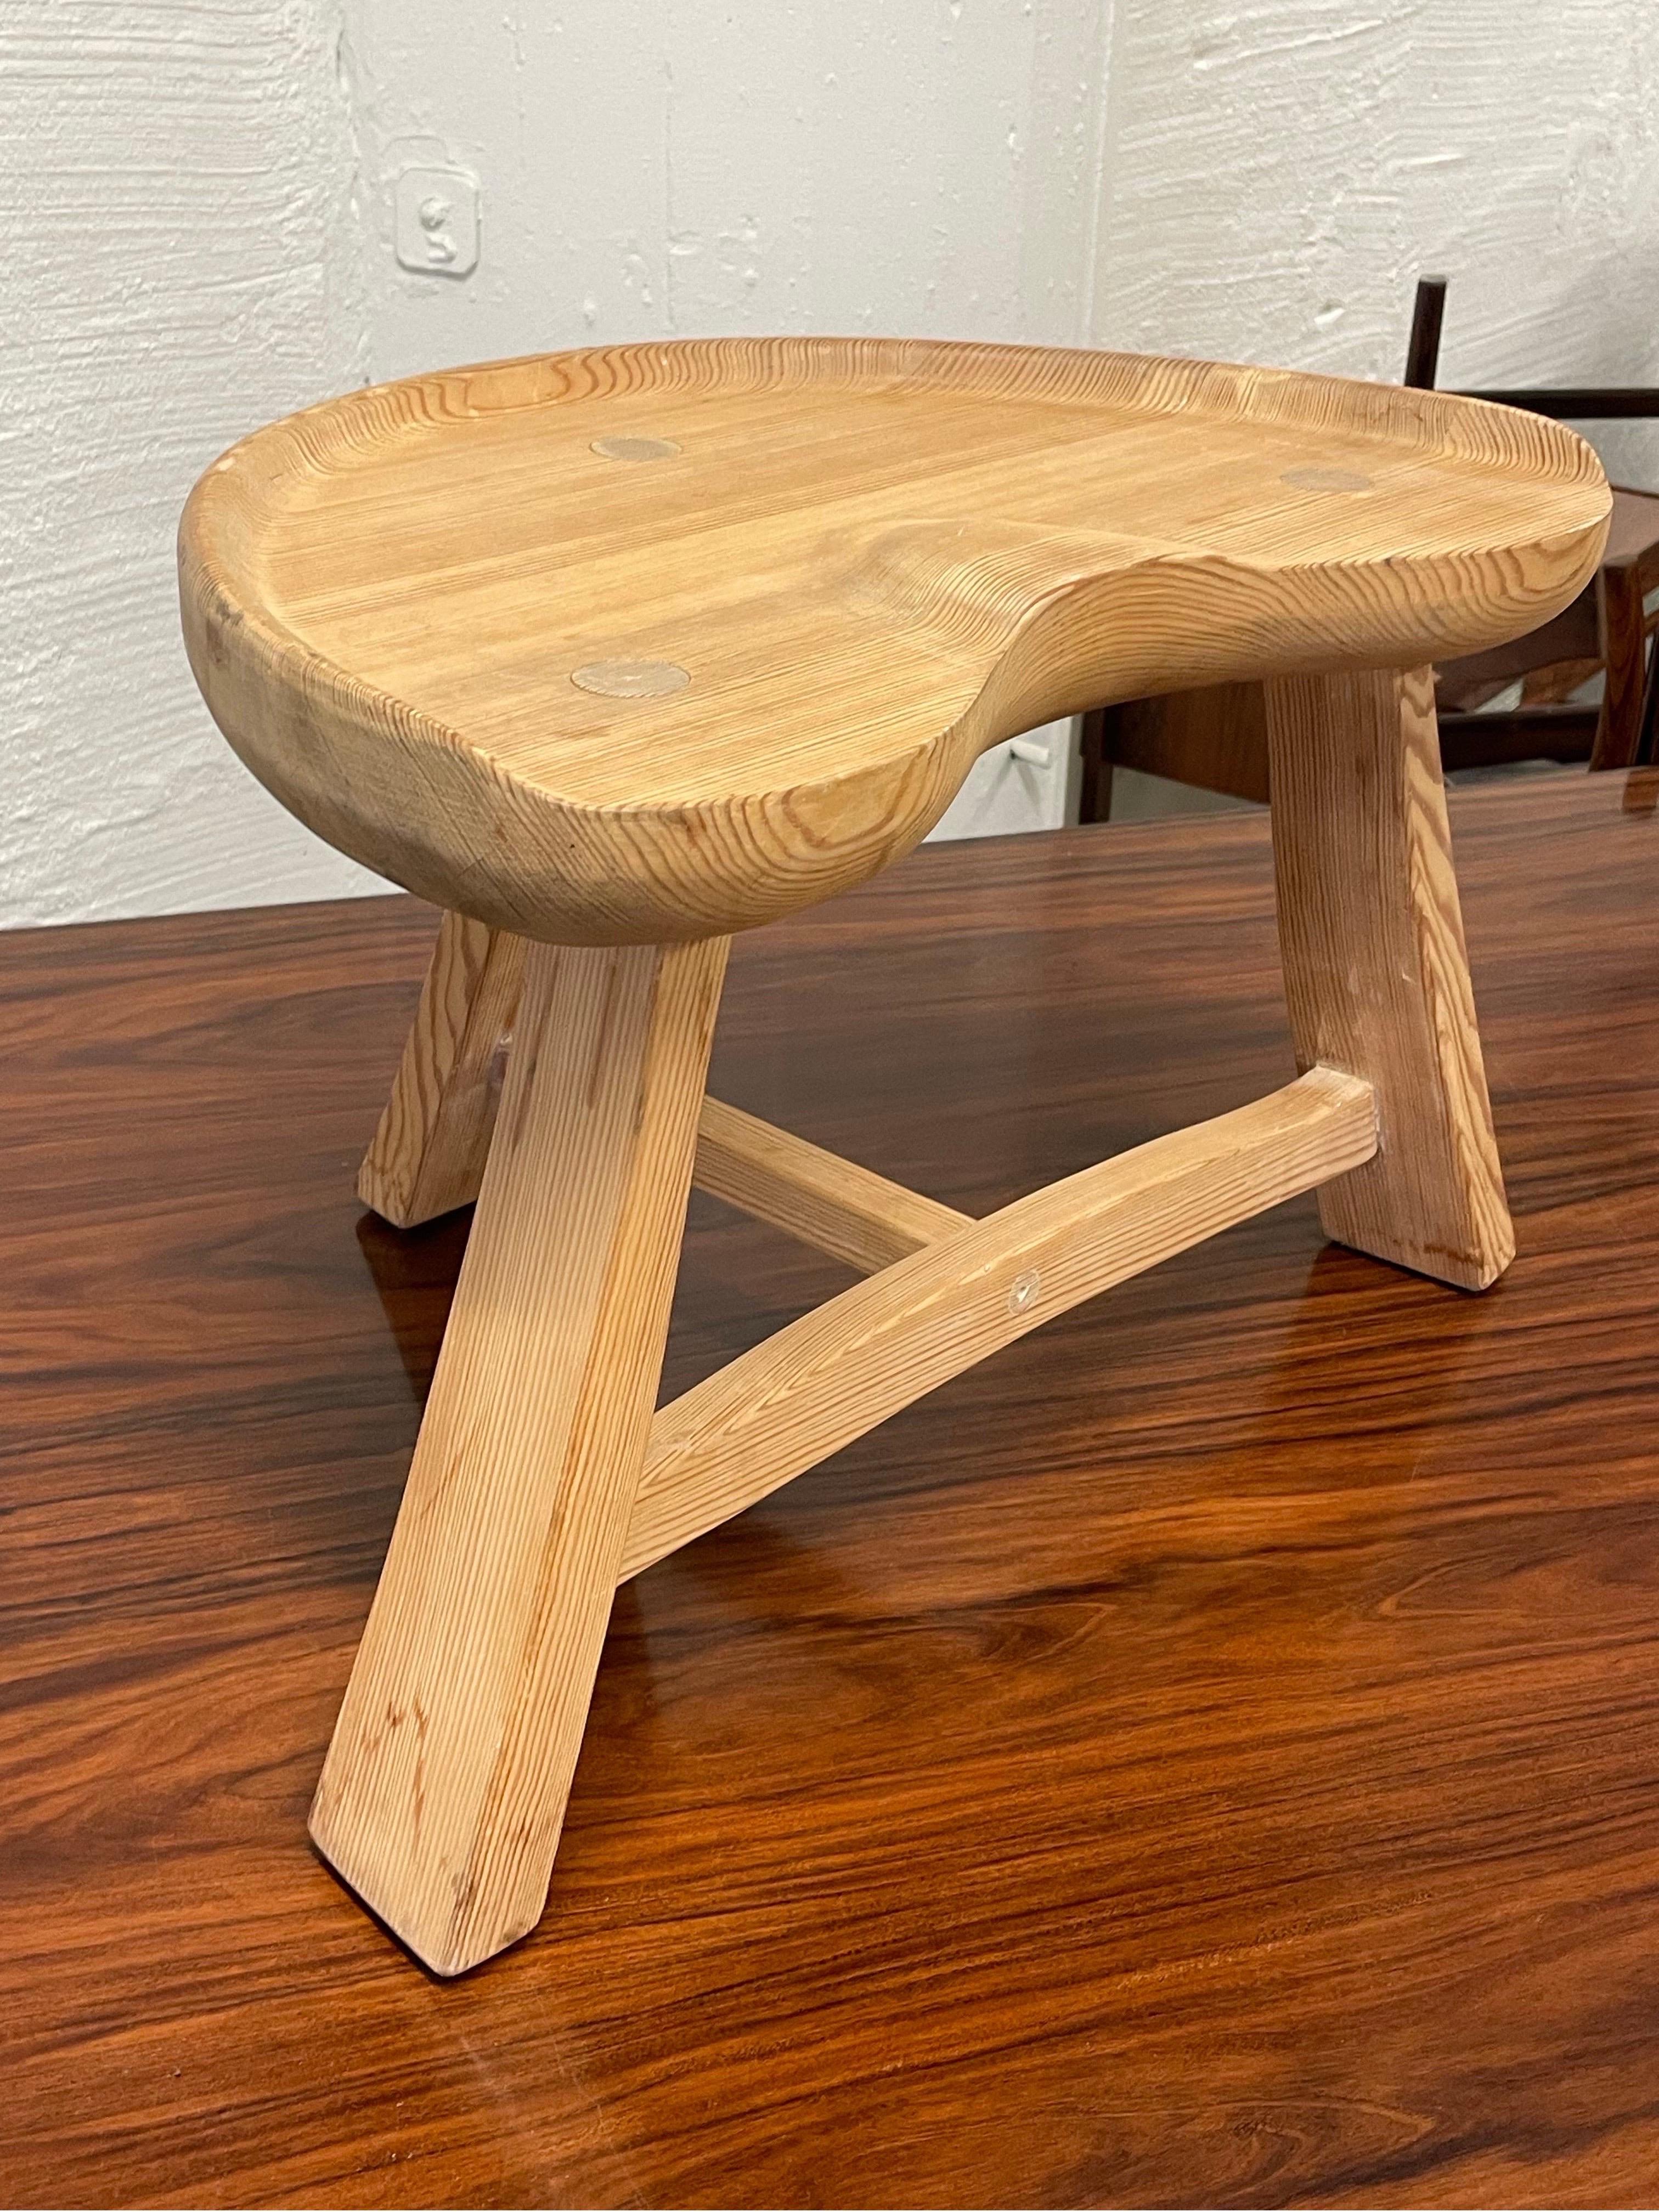 Scandinavian Moderne Three Legged Pine Stool  by Krogenæs Møbler, Norway 1960s In Good Condition For Sale In Bergen, NO